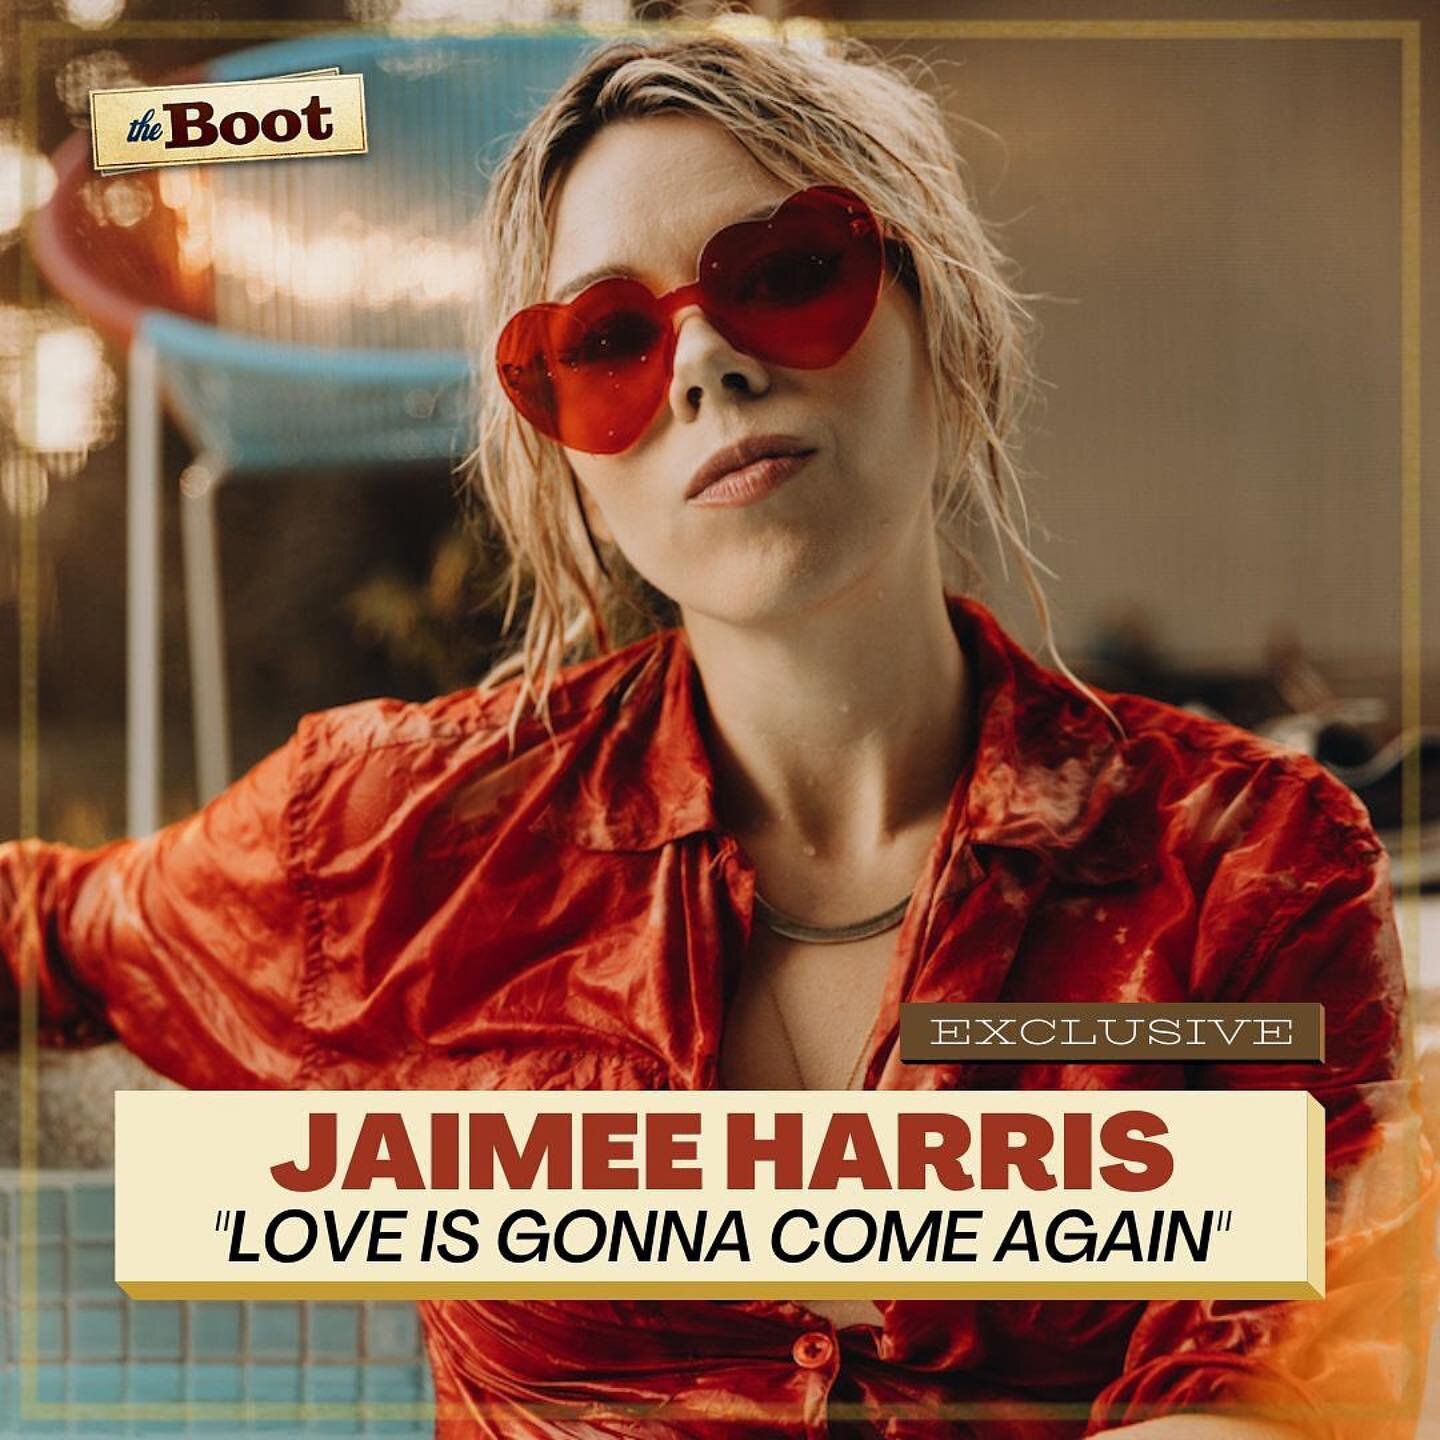 🚨MUSIC VIDEO PREMIERE 🚨

&quot;A warm, stirring message of resilience and understanding to those navigating some of life's toughest moments. Driven by Harris' rich, heart-wrenching vocals, 'Love is Gonna Come Again' offers a reminder that even the 